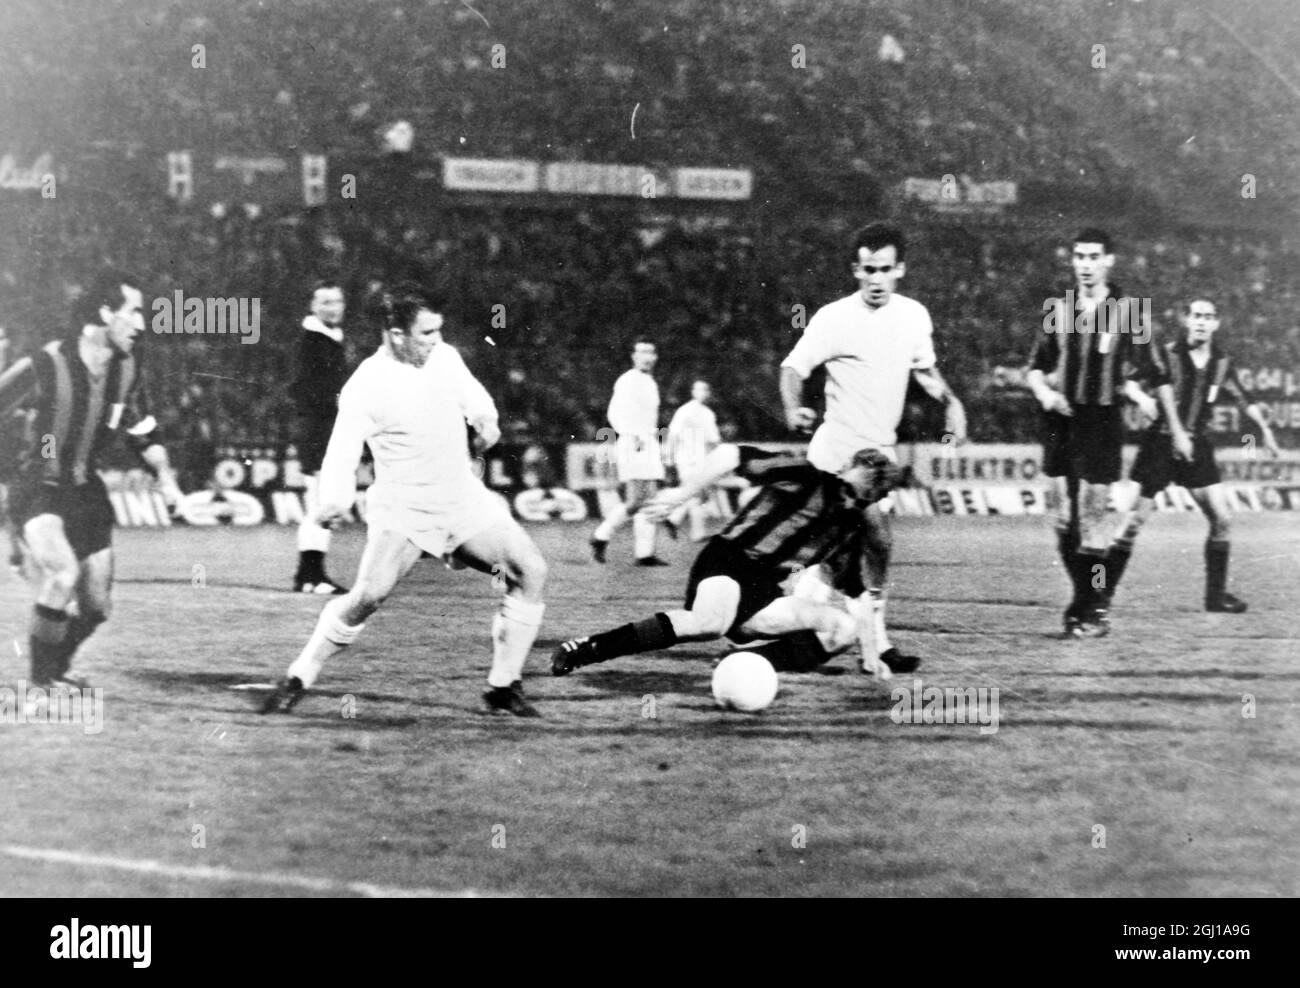 INTER MAILAND V REAL MADRID - EUROPEAN CUP OF LEAGUE CHAMPIONS FINAL, FUSSBALL IN AKTION IN WIEN, ÖSTERREICH ; 29. MAI 1964 Stockfoto